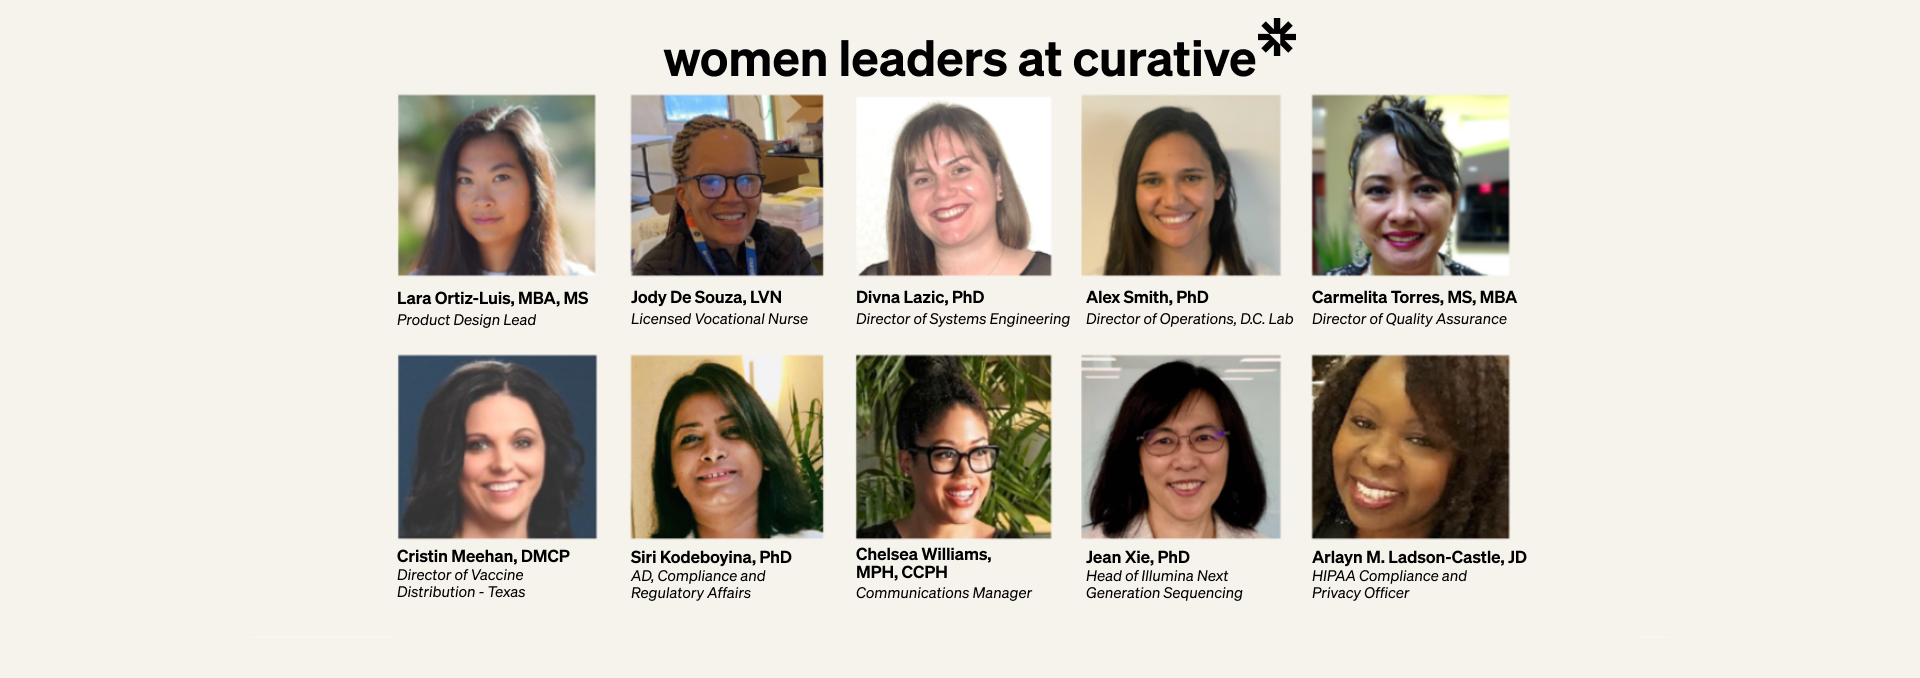 Curative Celebrates Women Leaders this Women’s History Month